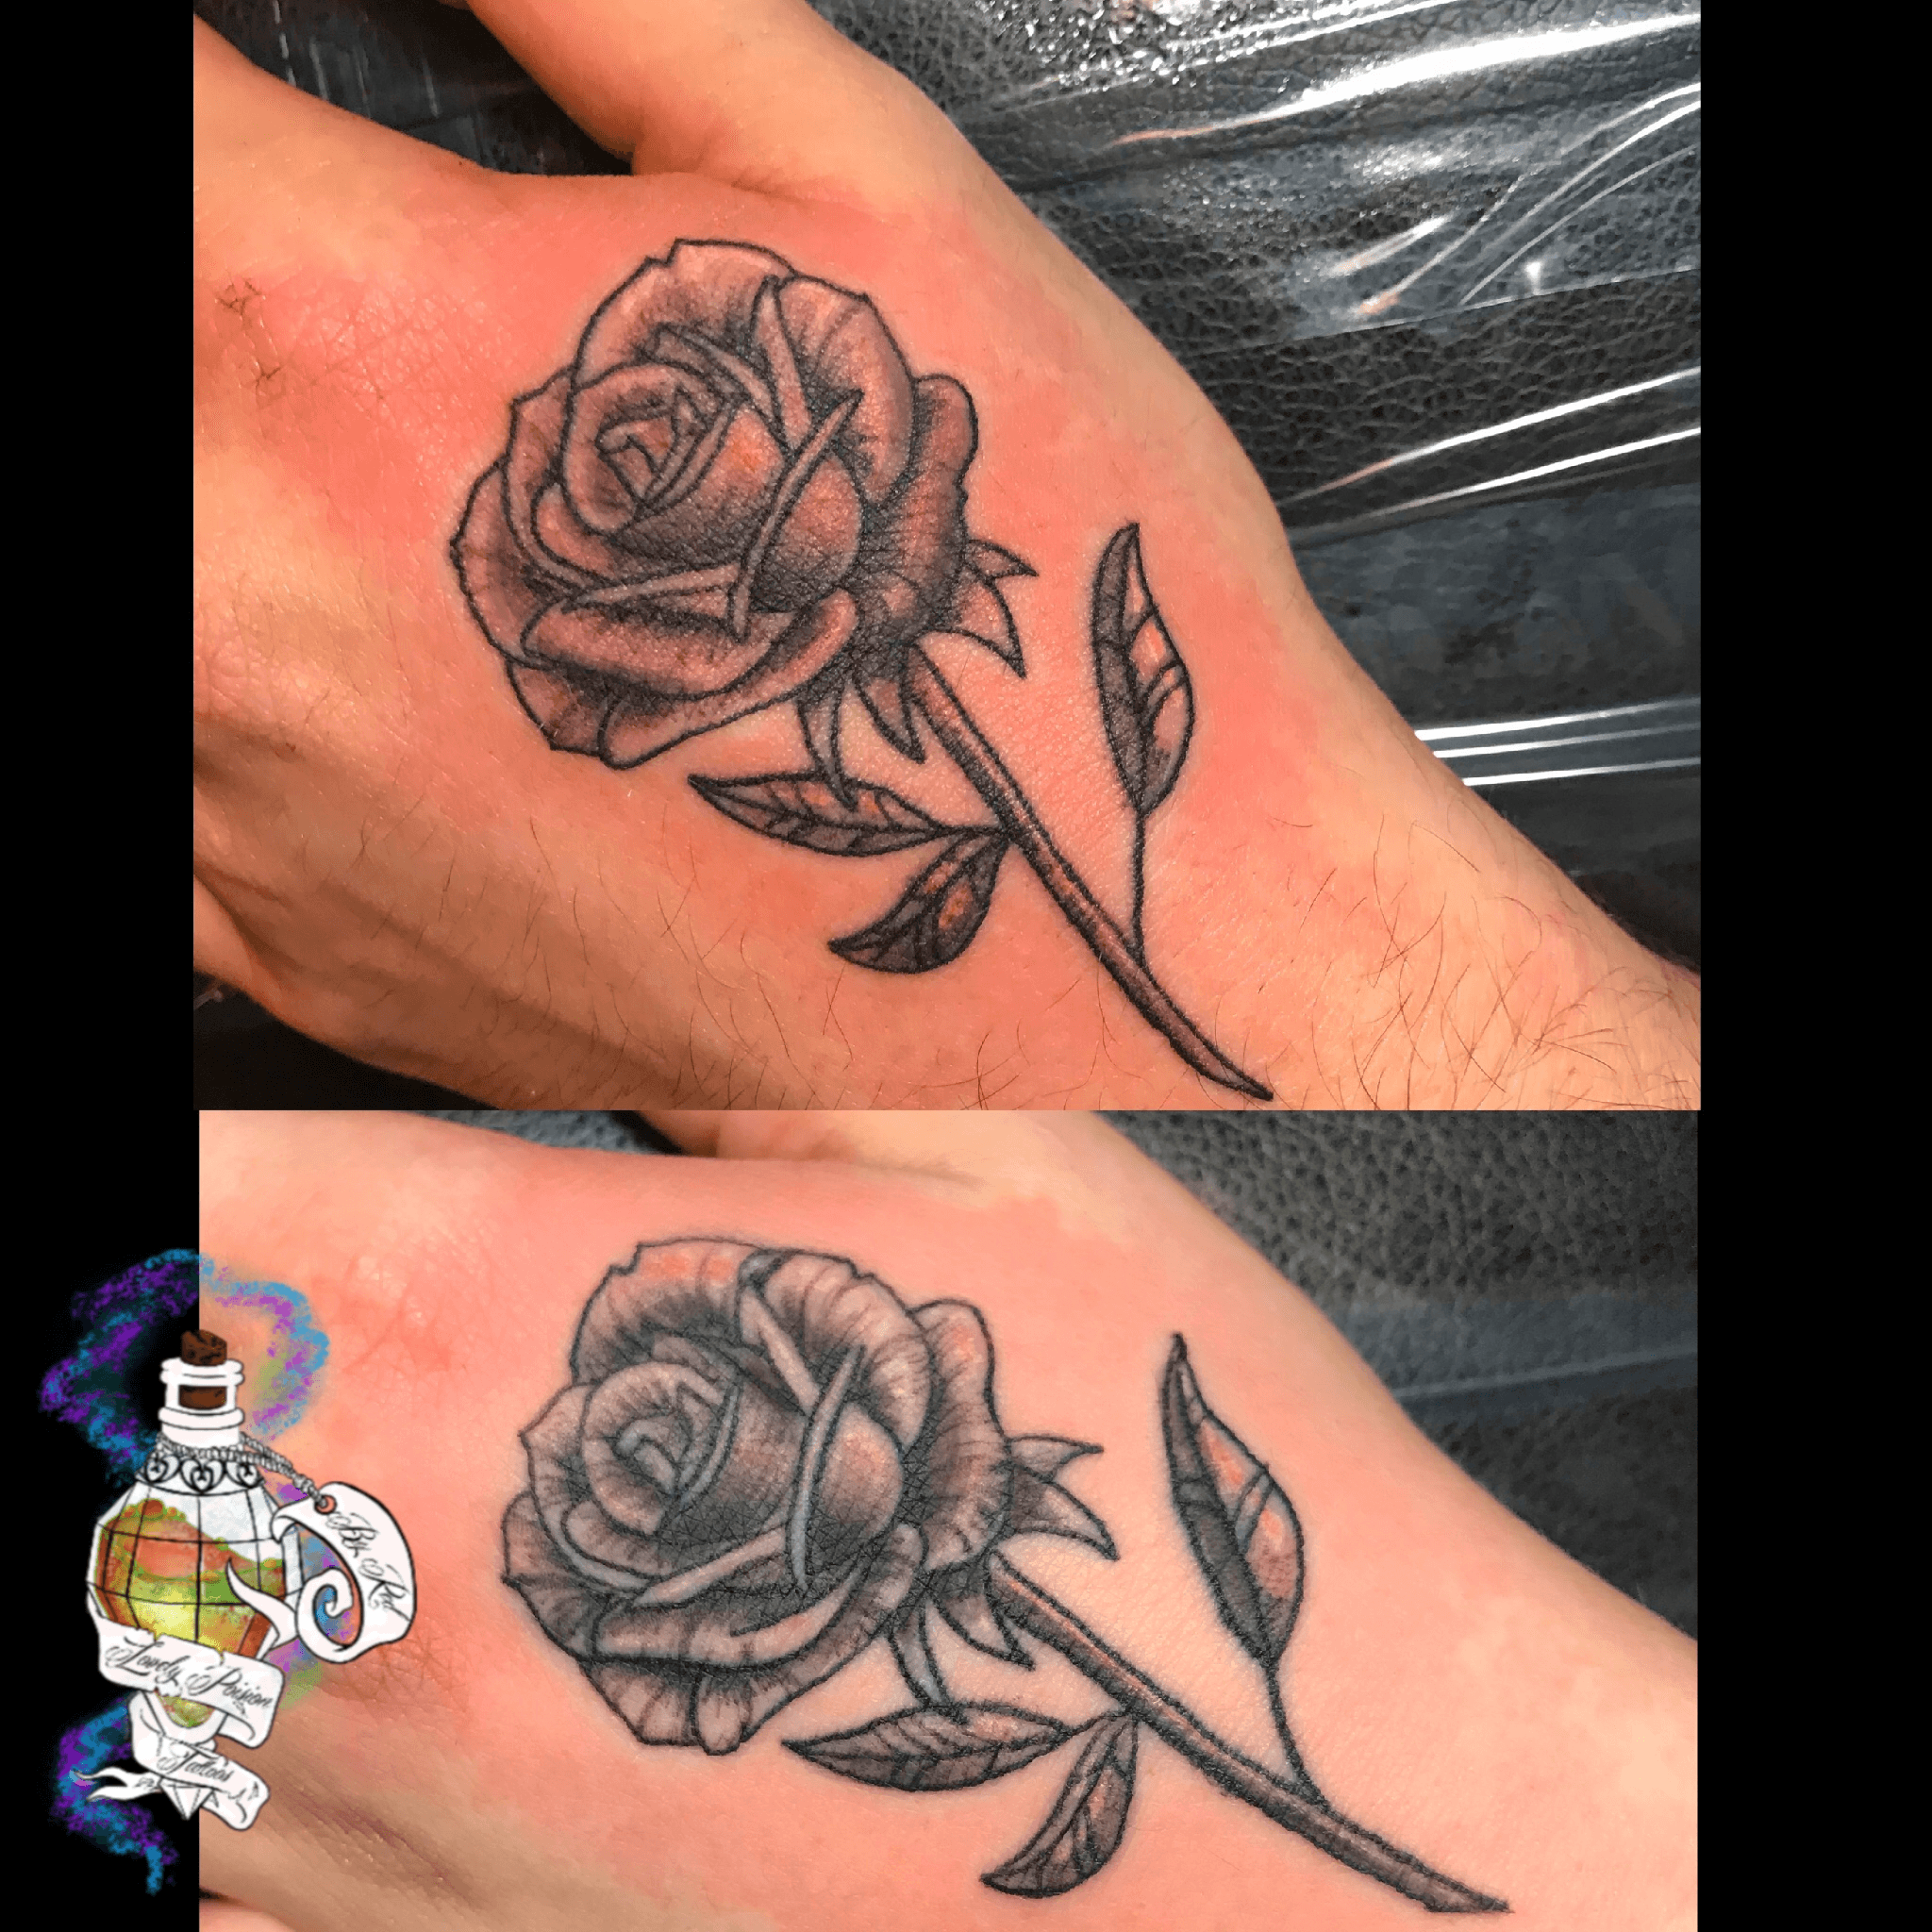  105 Best Rose Flower Tattoo Designs  Meaning and Ideas for Men and Women